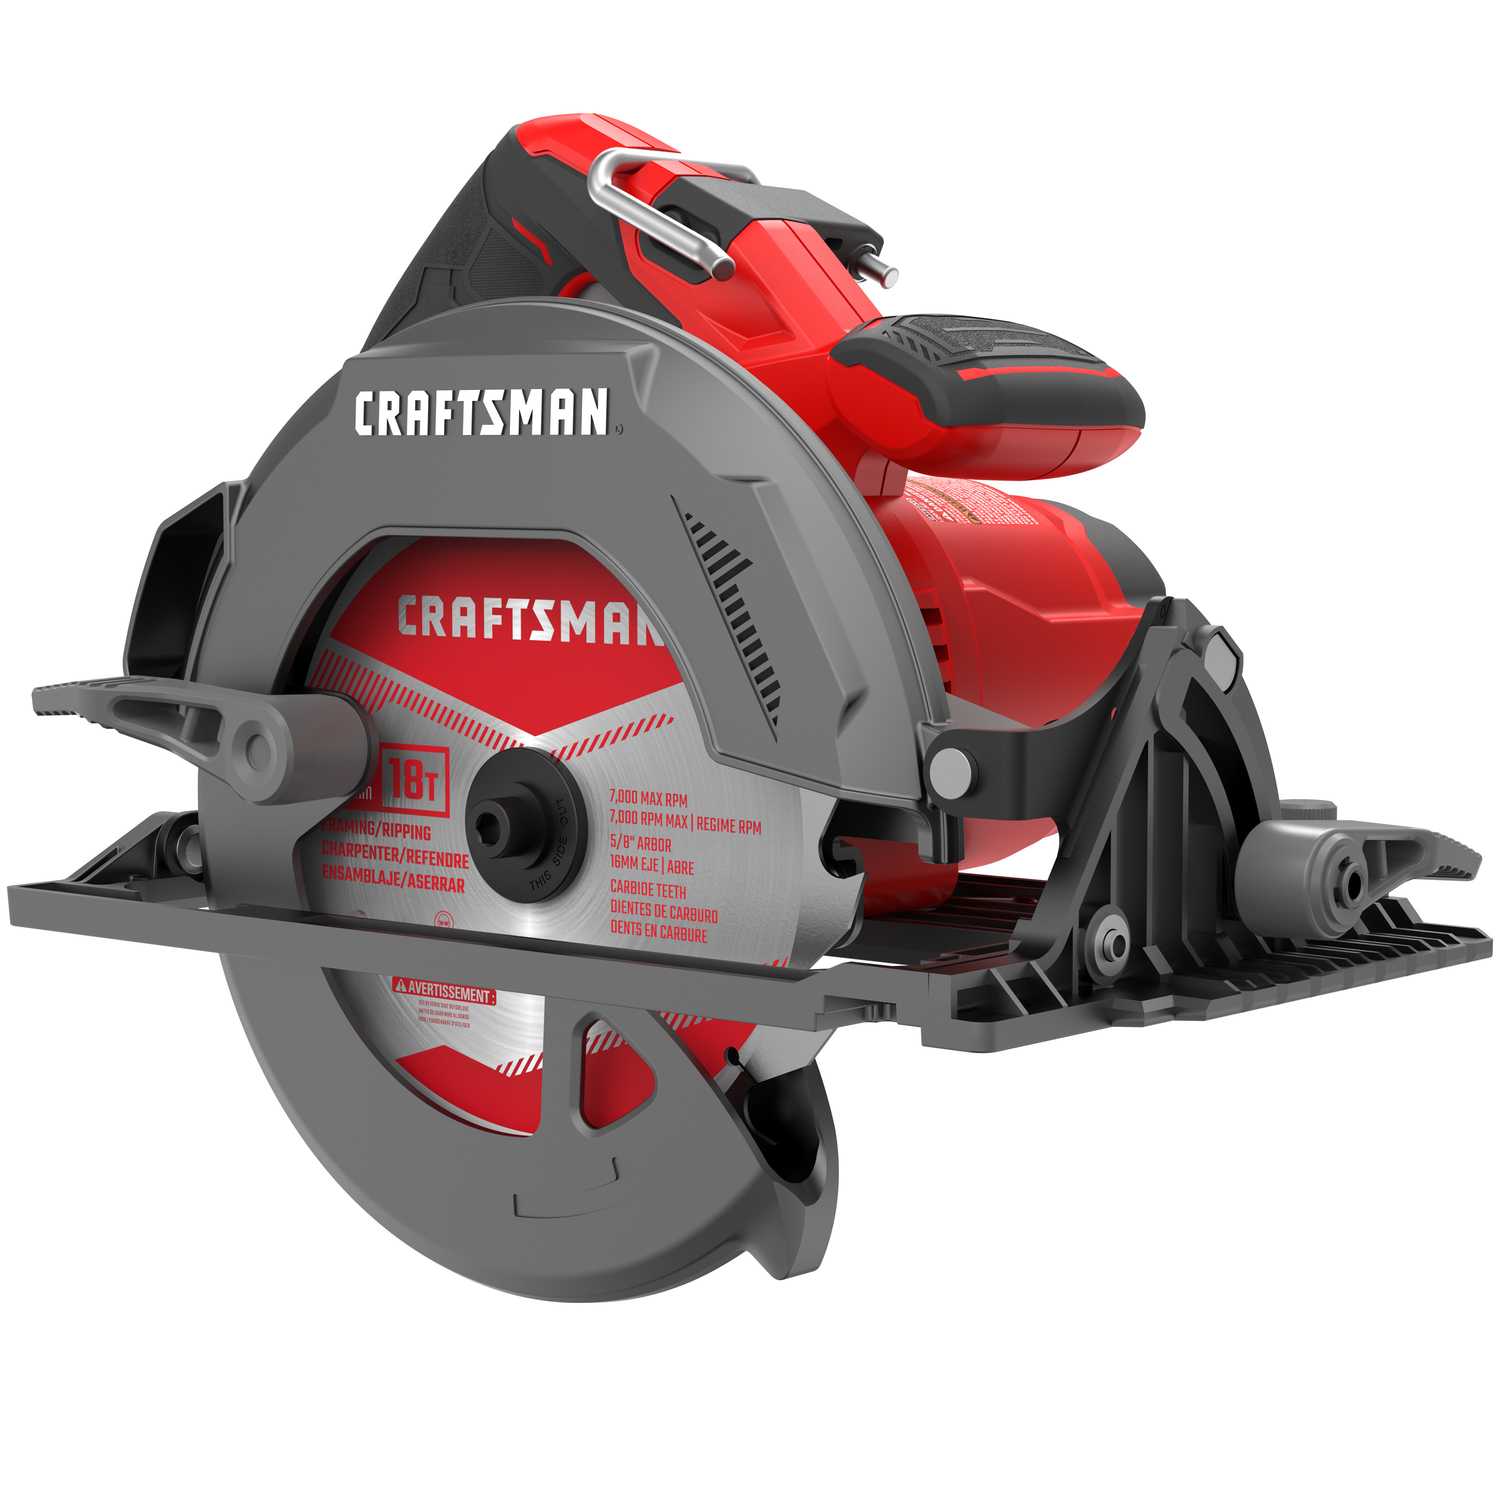 Craftsman 7-1/4 in. 15 amps Corded Circular Saw 5500 rpm